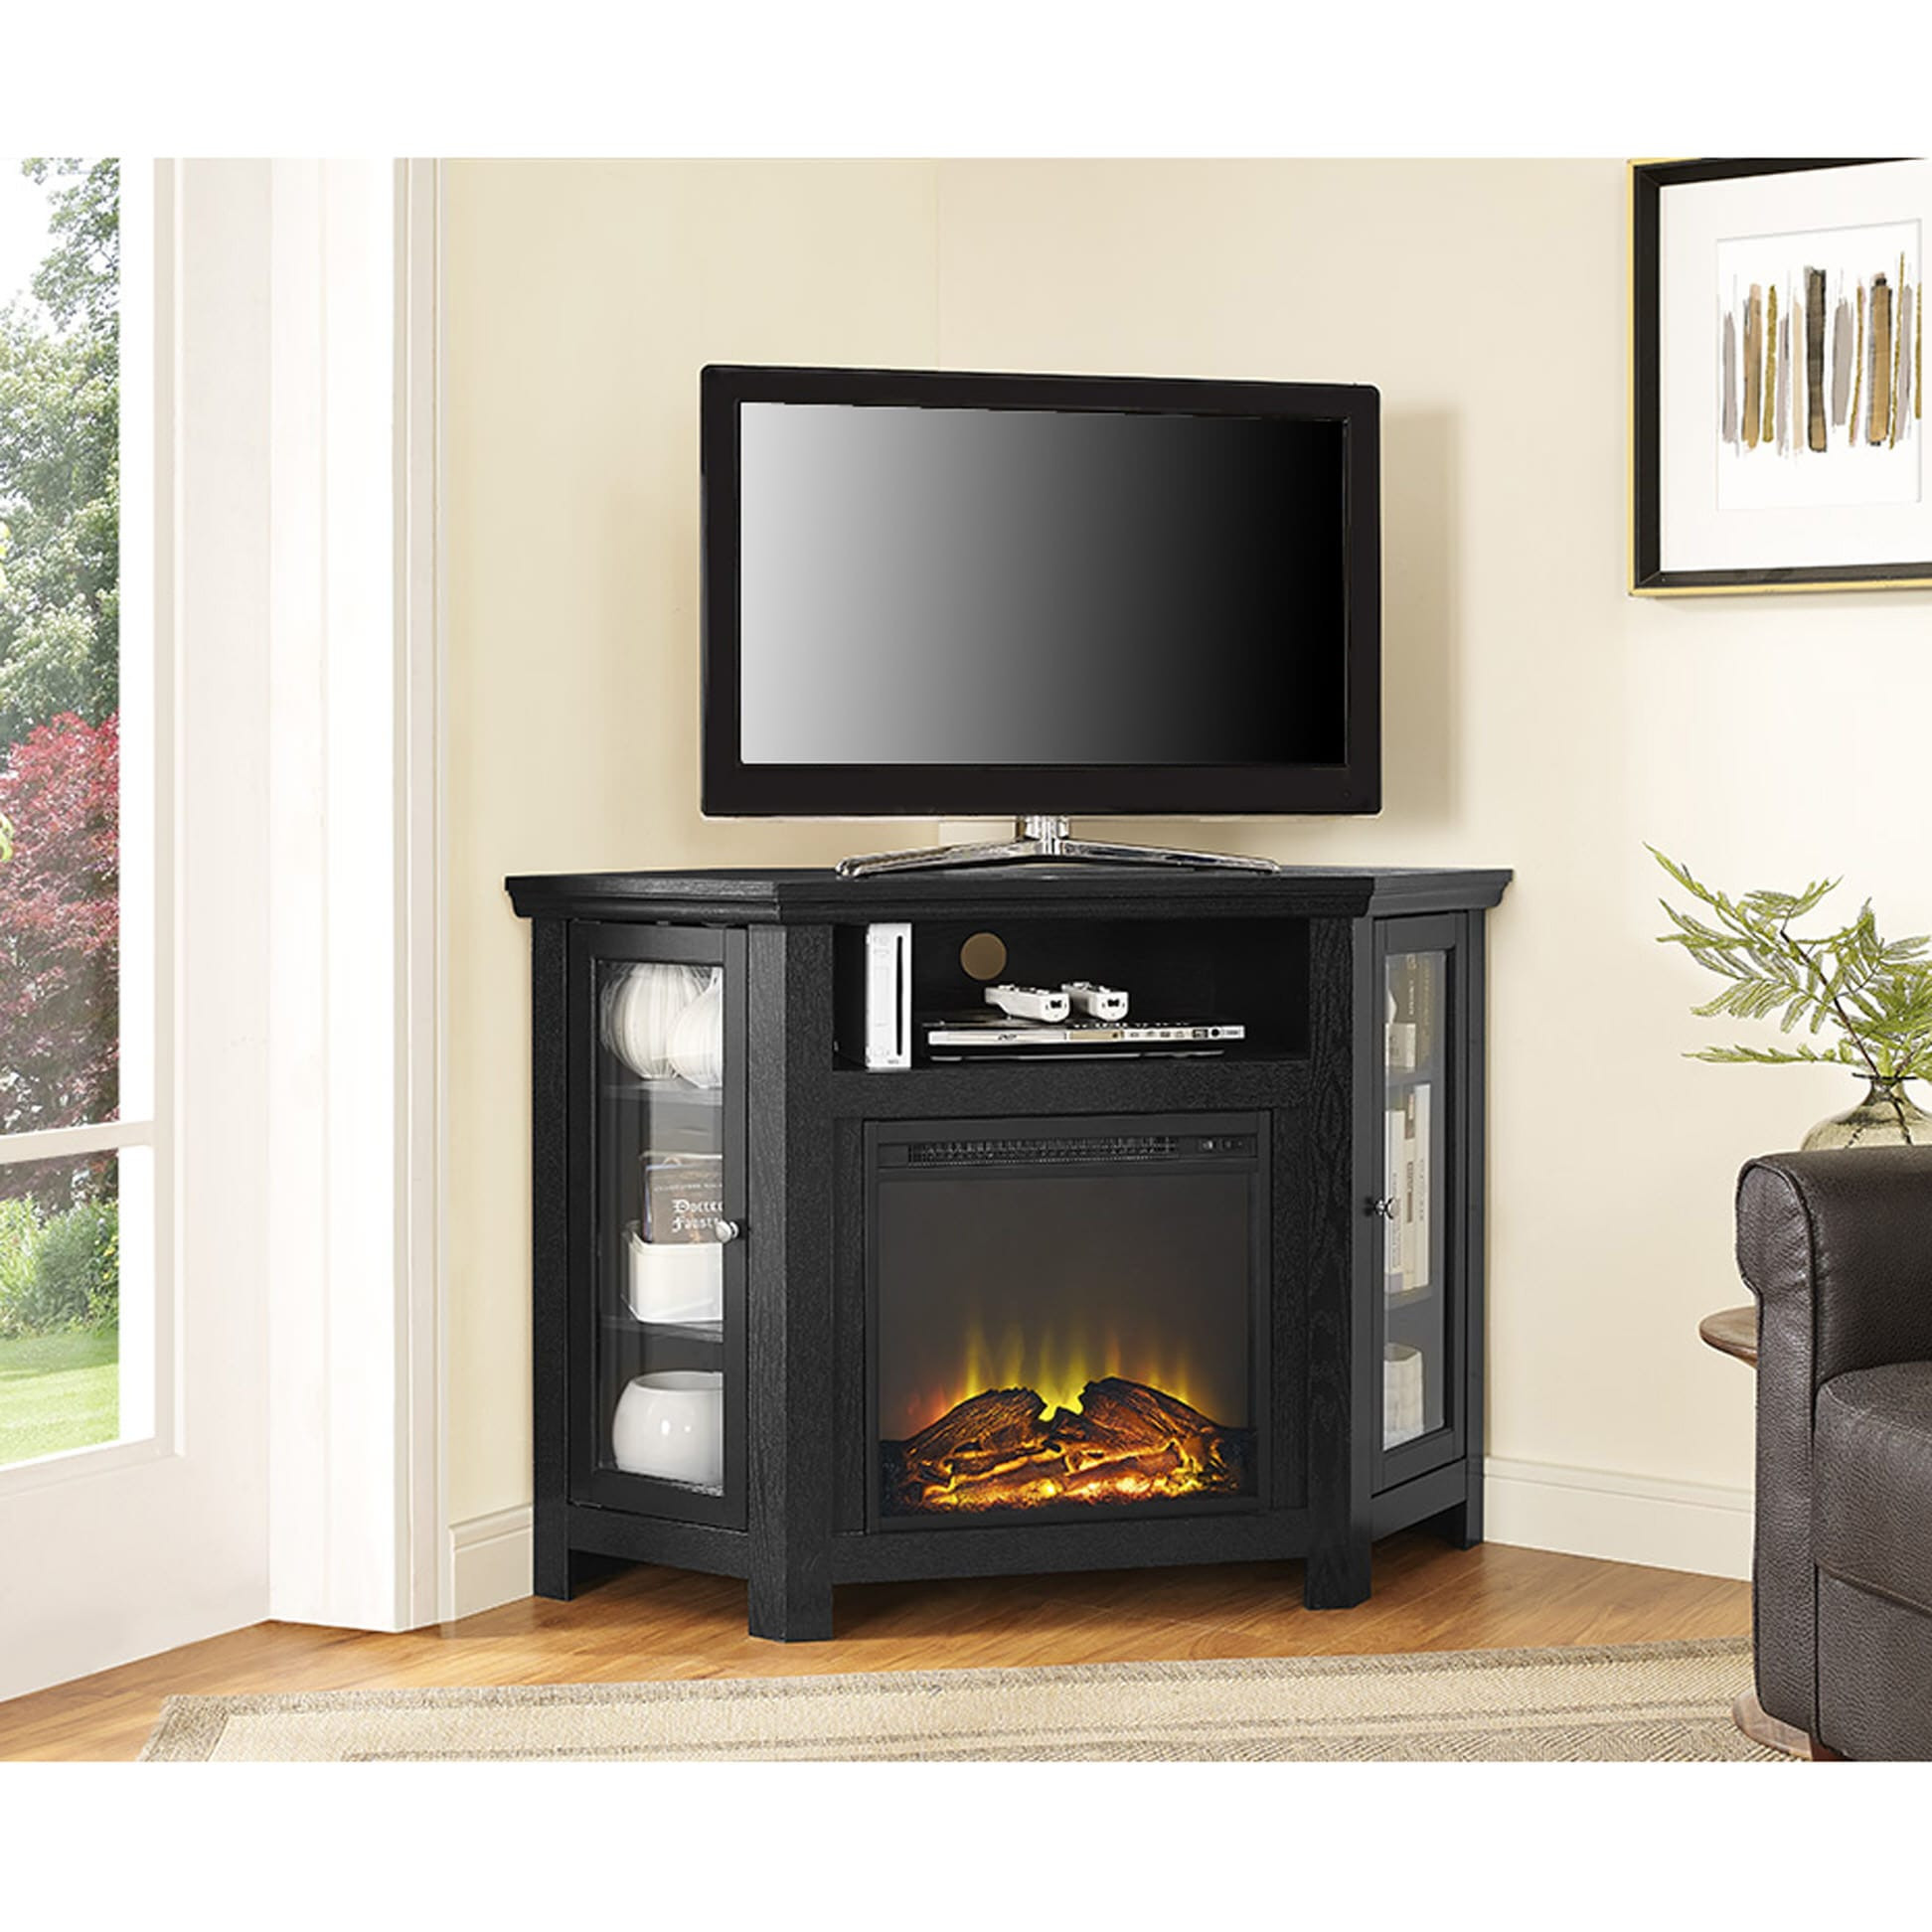 Best ideas about Fireplace Tv Stands
. Save or Pin Jackson 48 Inch Corner Fireplace TV Stand Black by Now.